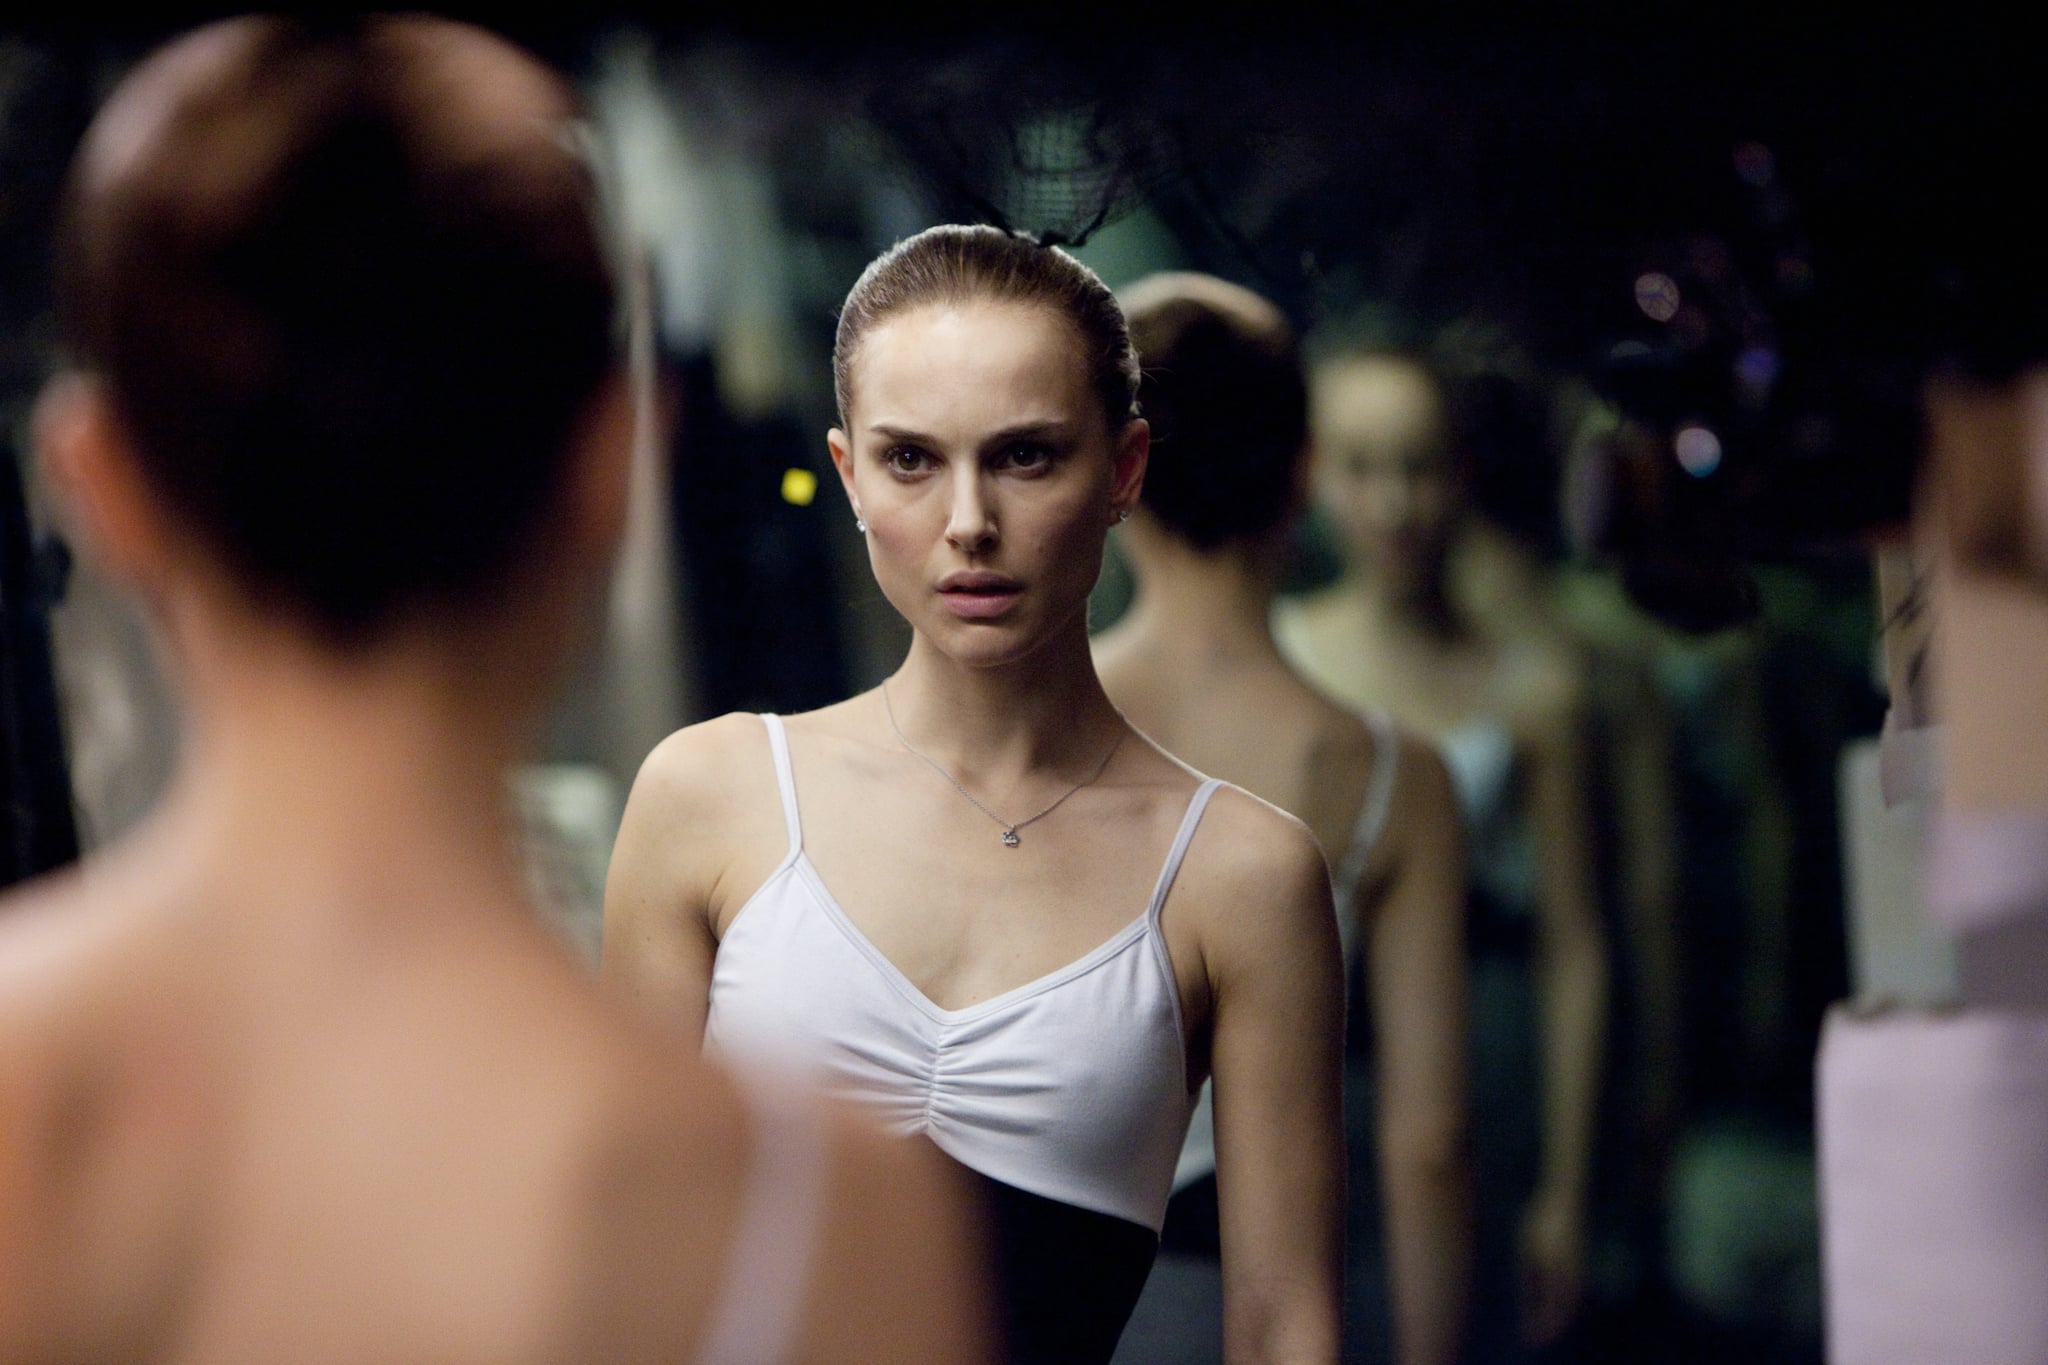 Black Swan | Watch With Caution: Racy Horror Movies Are Both Terrifying and Titillating | POPSUGAR Entertainment Photo 27